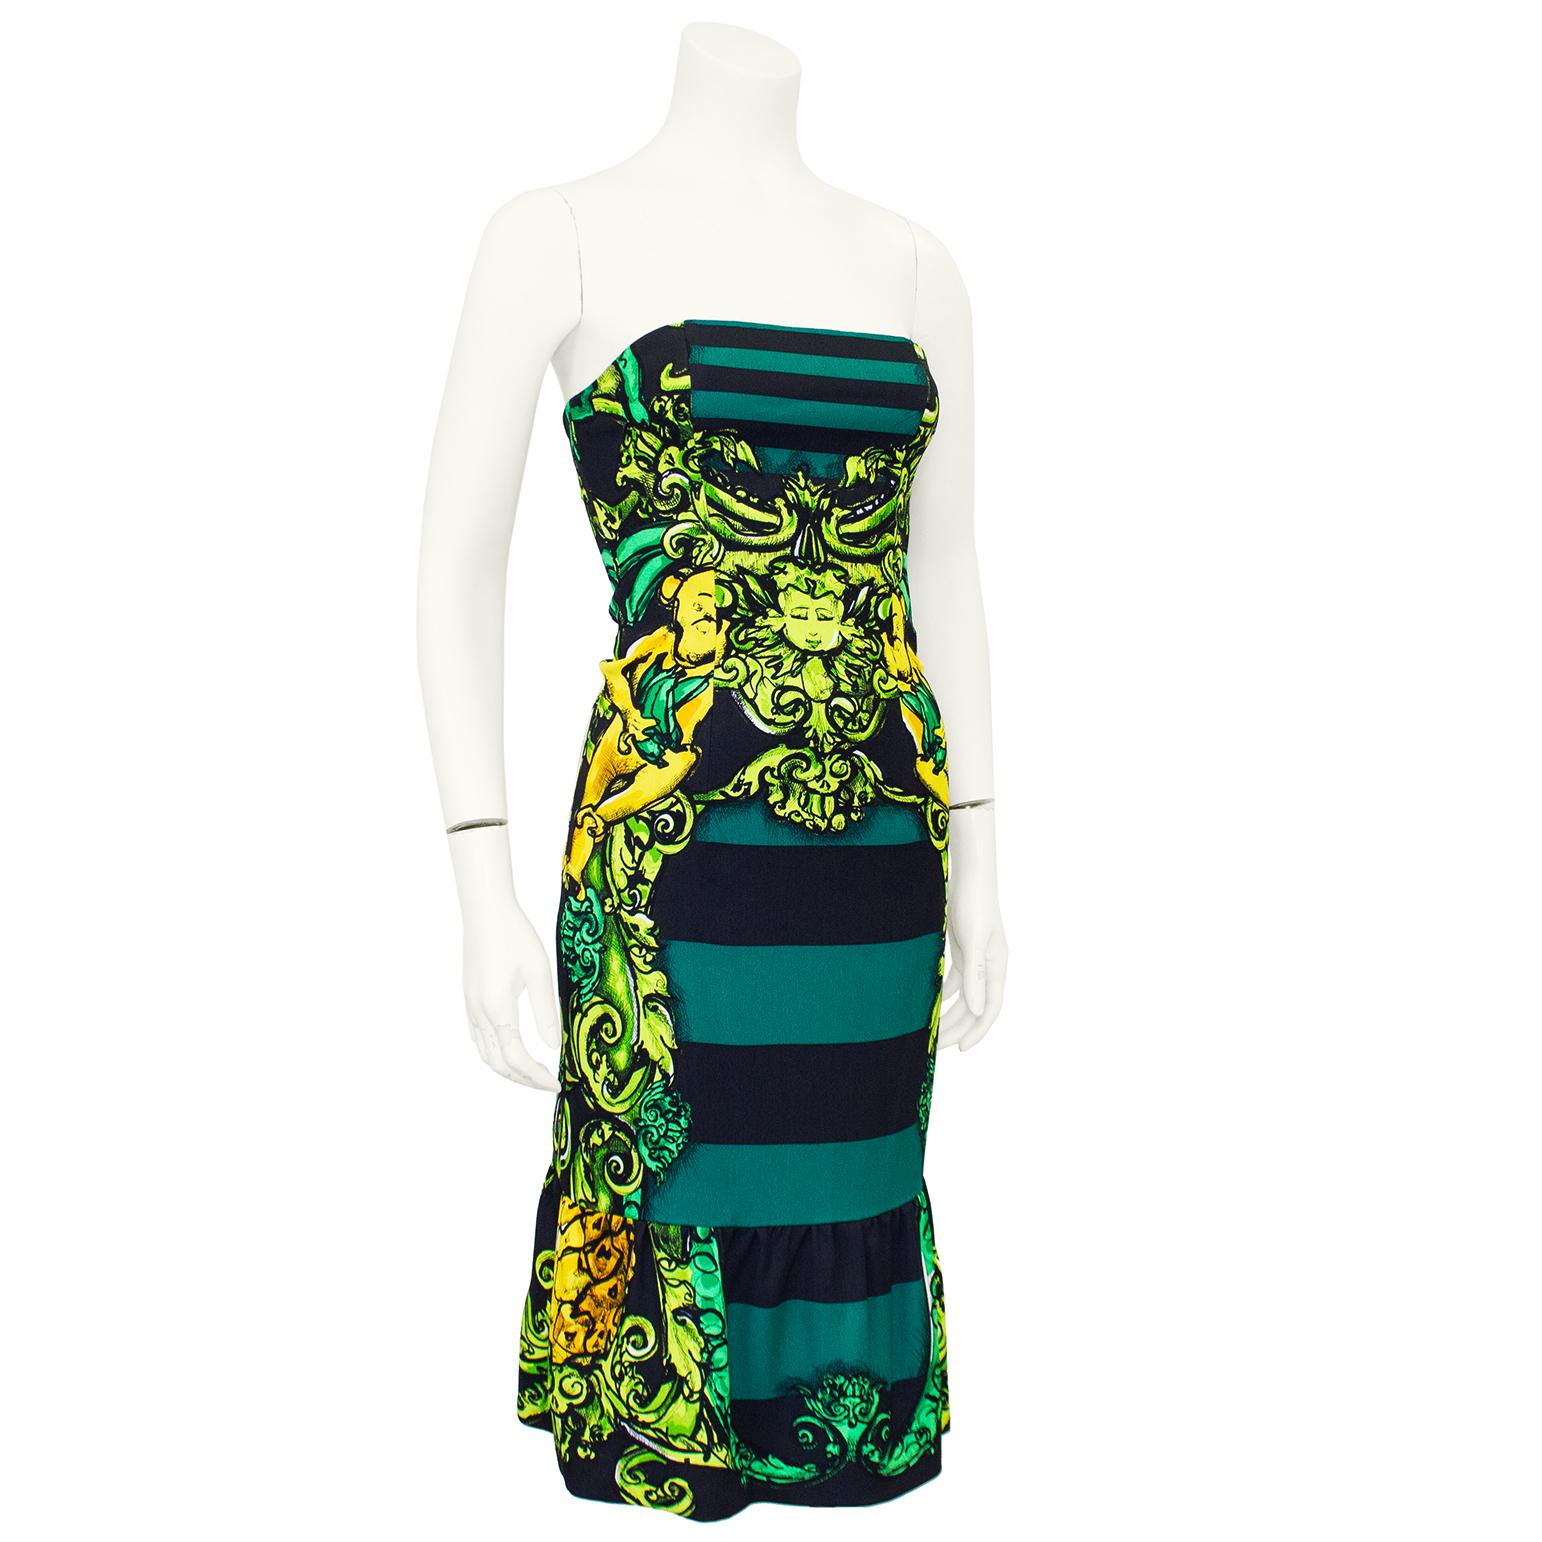 Spring/Summer 2011 Prada printed dress. Green and black horizontal stripe with neon green and yellow cherub, monkey and ornate details throughout. Strapless and fitted through the body and a ruffle skirt. An iconic Prada piece. Worn in the SS 2011